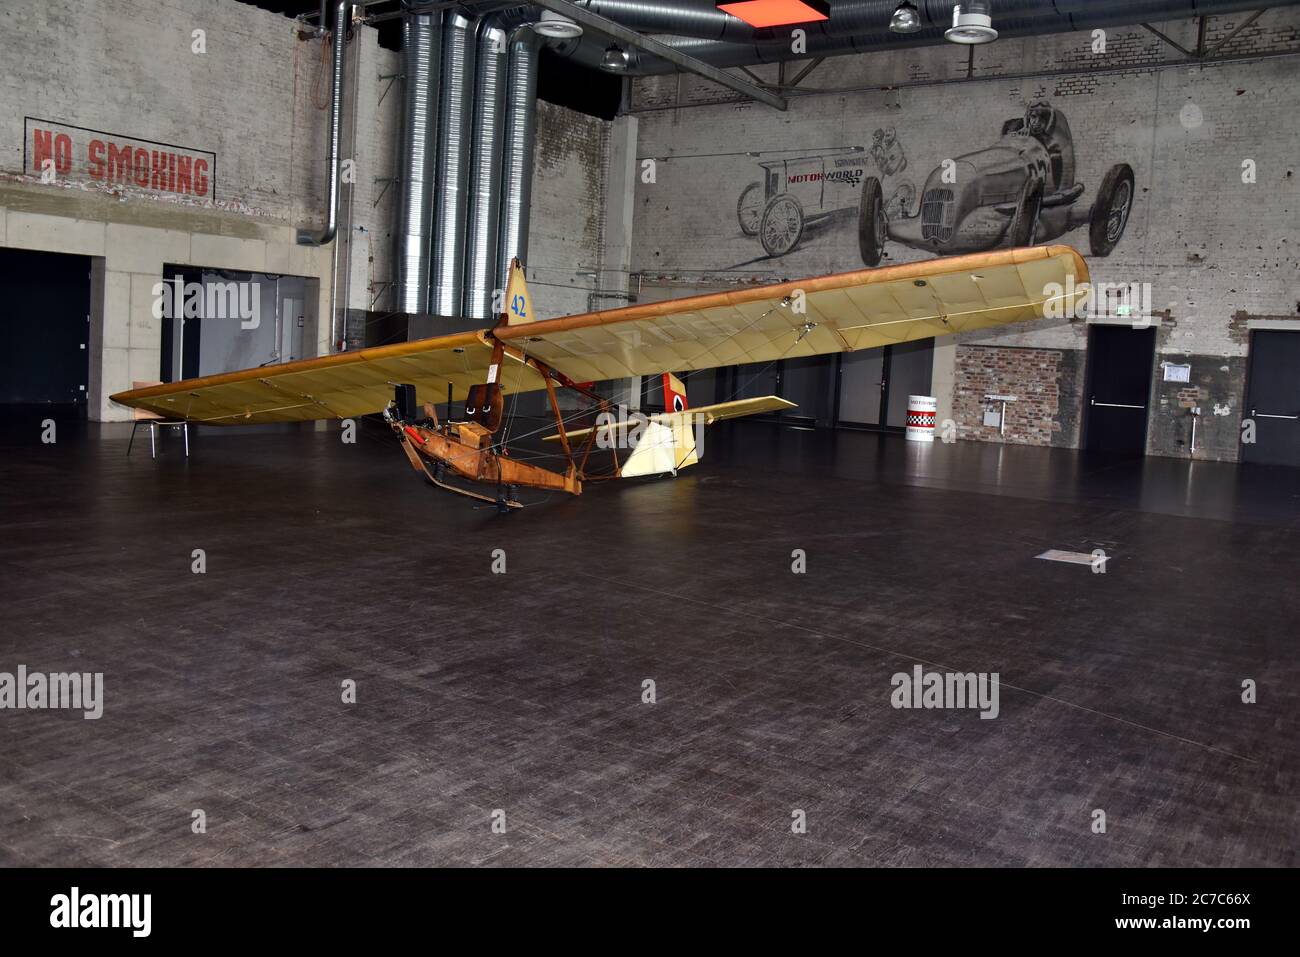 Cologne, Germany. 15th July, 2020. A school glider SG 38, glider from the year 1942, is standing at a press appointment in the Motorworld. Credit: Horst Galuschka/dpa/Alamy Live News Stock Photo